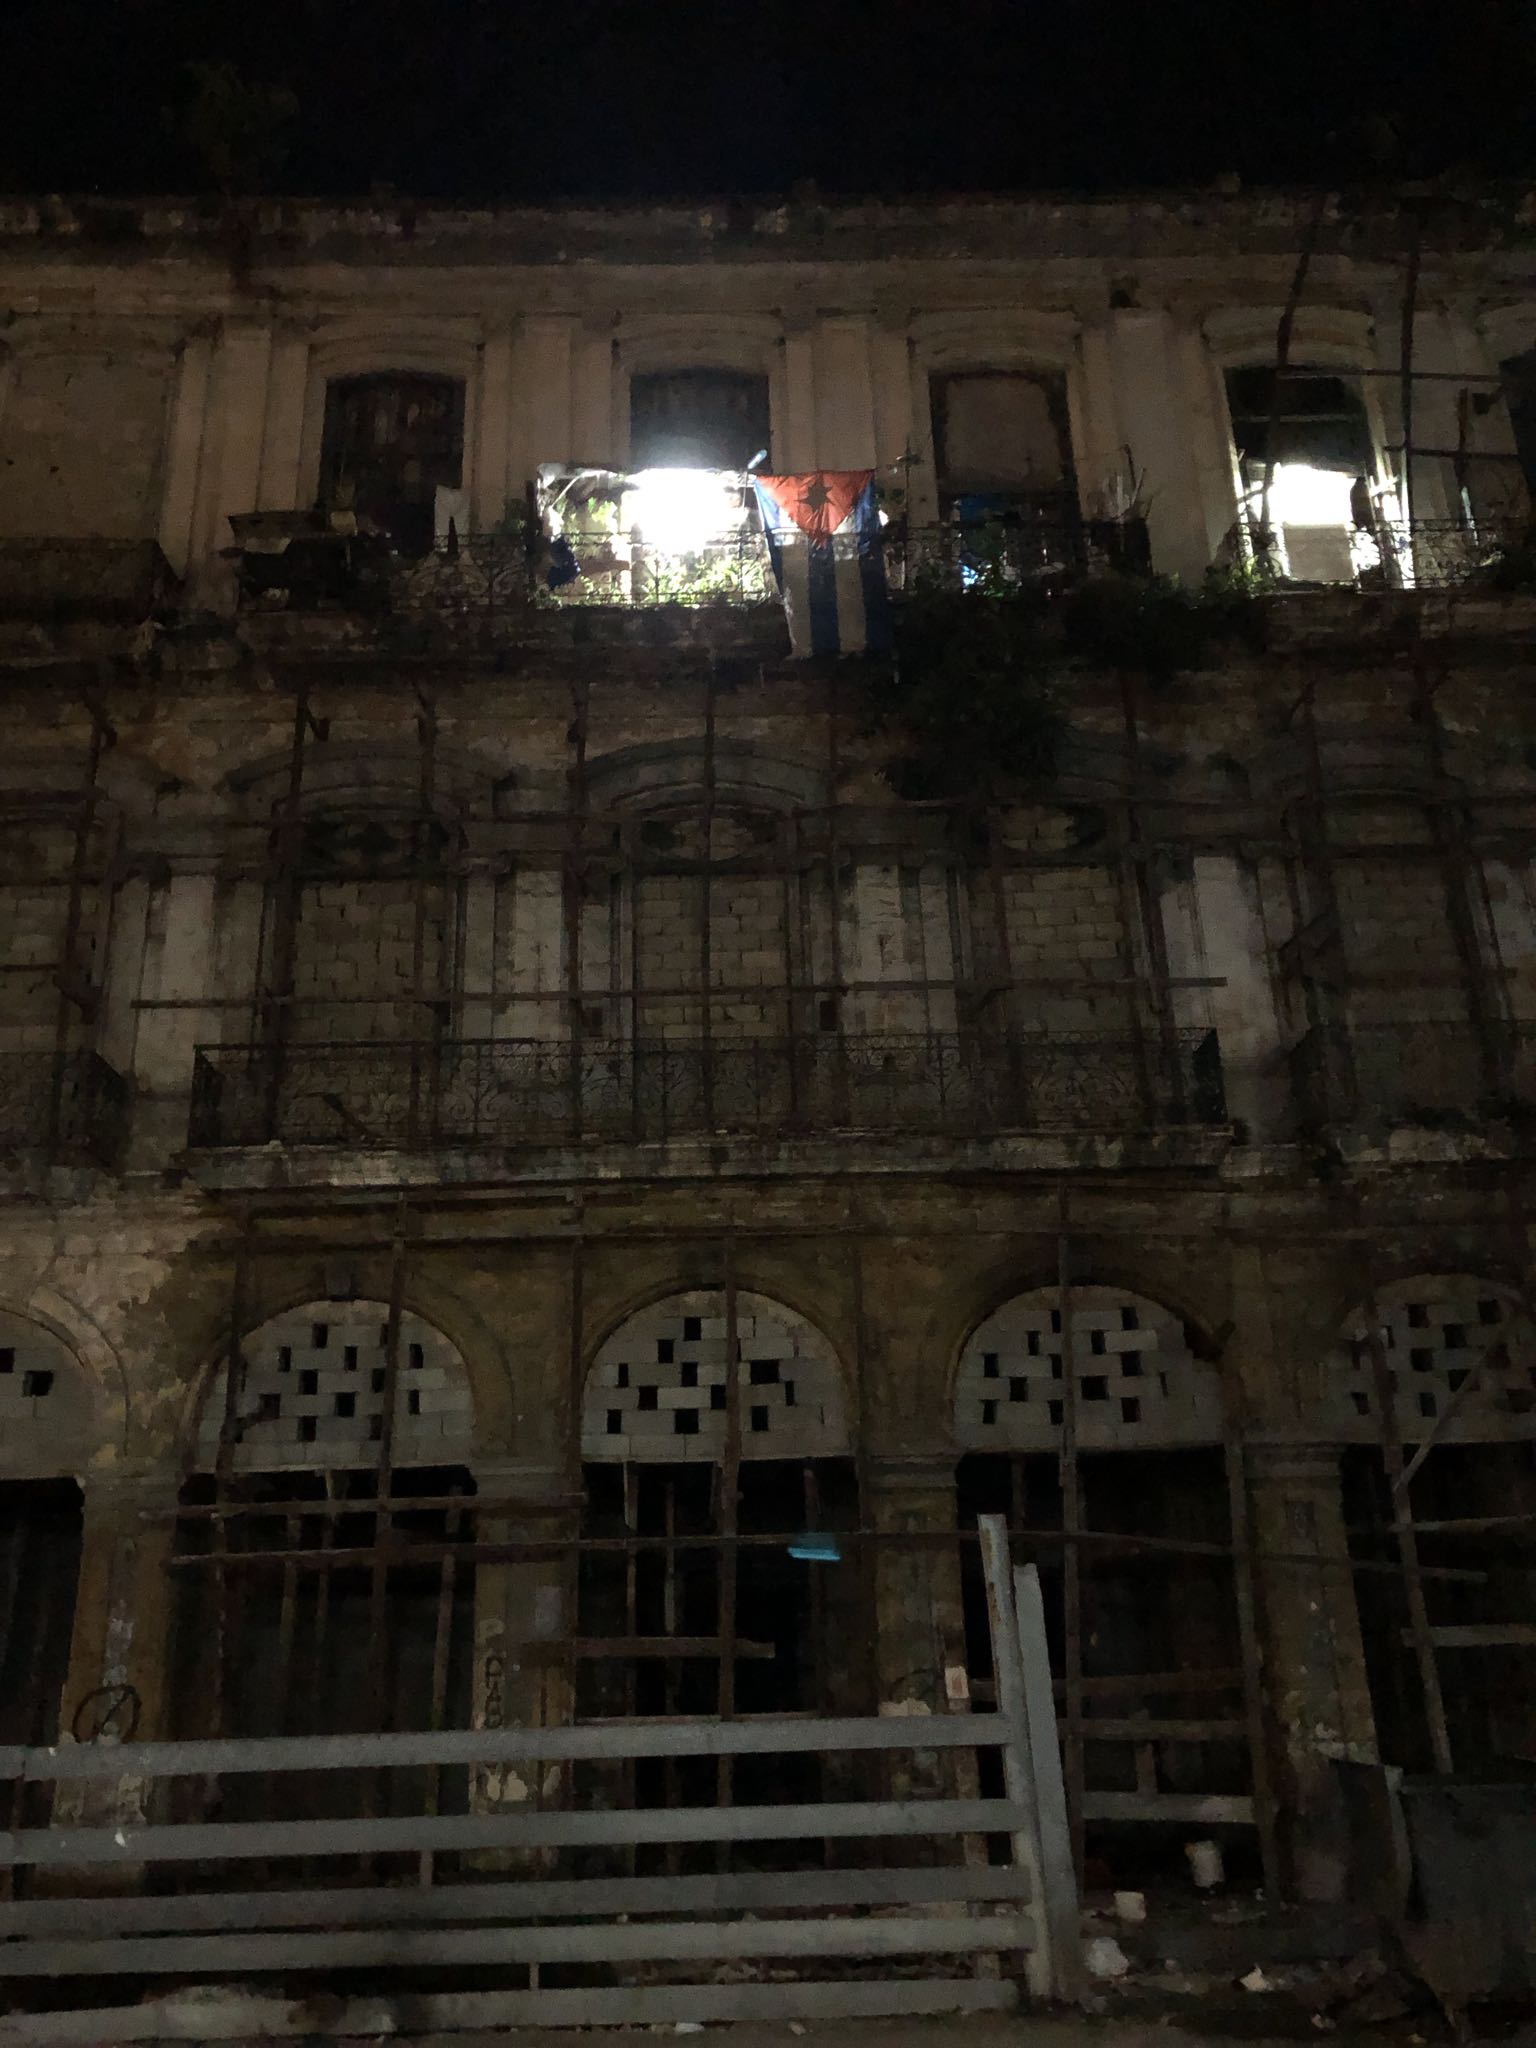 Photo 146 of 221 from the album Highlights Cuba 2019.